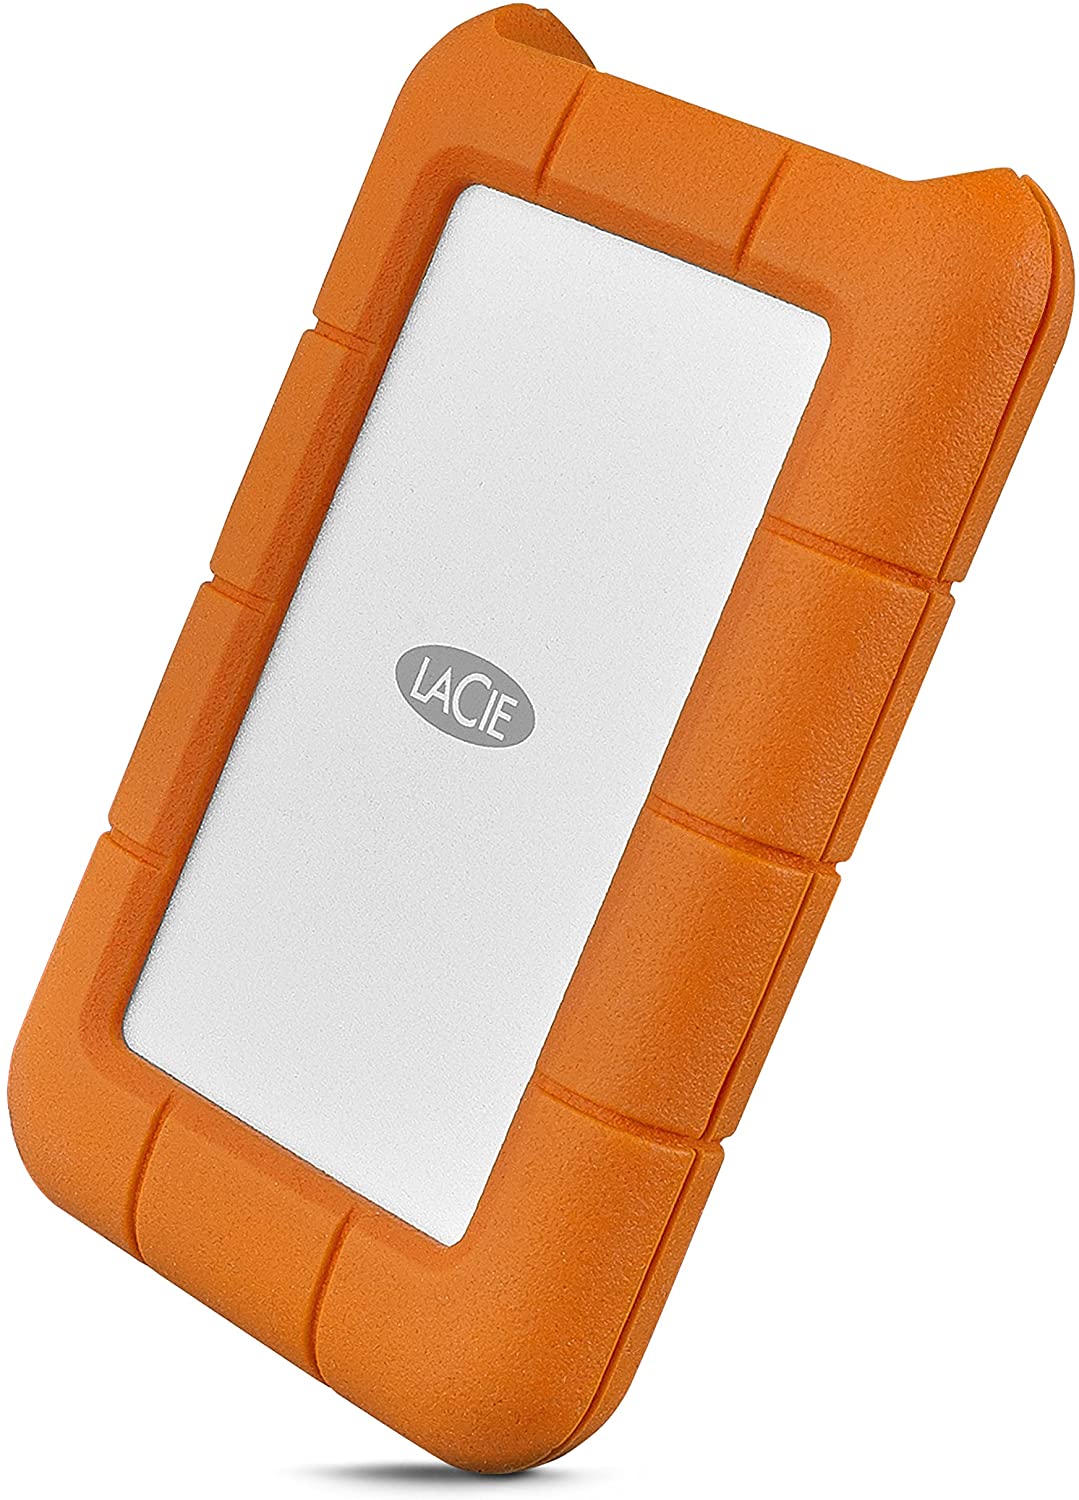 review external hard drive for mac